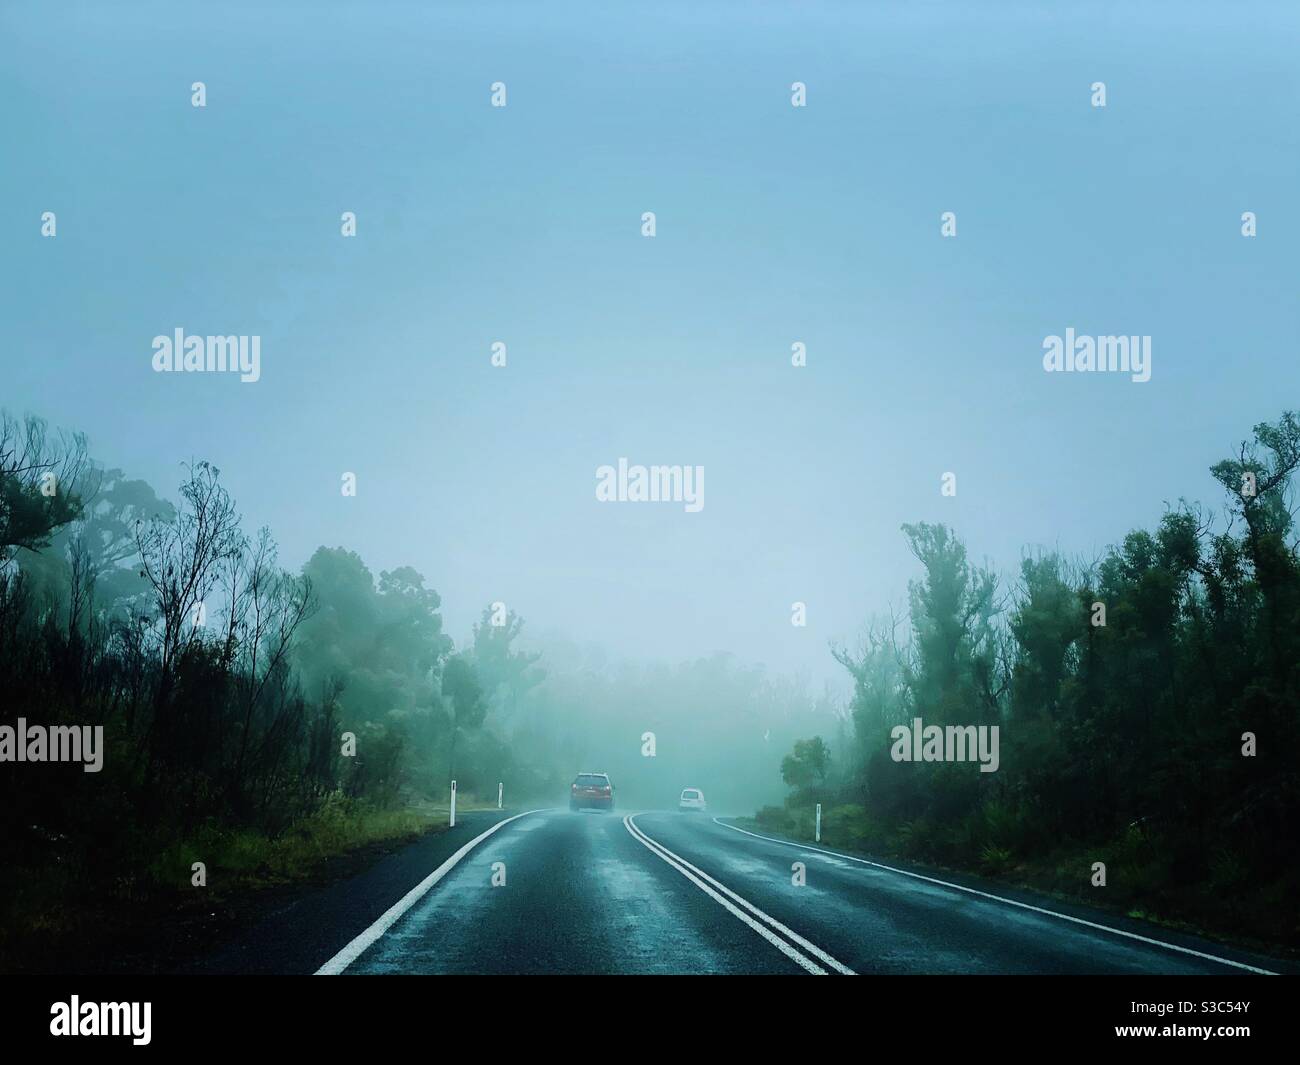 Rear view of two cars travelling on road through the forest on a misty, rainy day. Landscape background for travel and road trip. Stock Photo